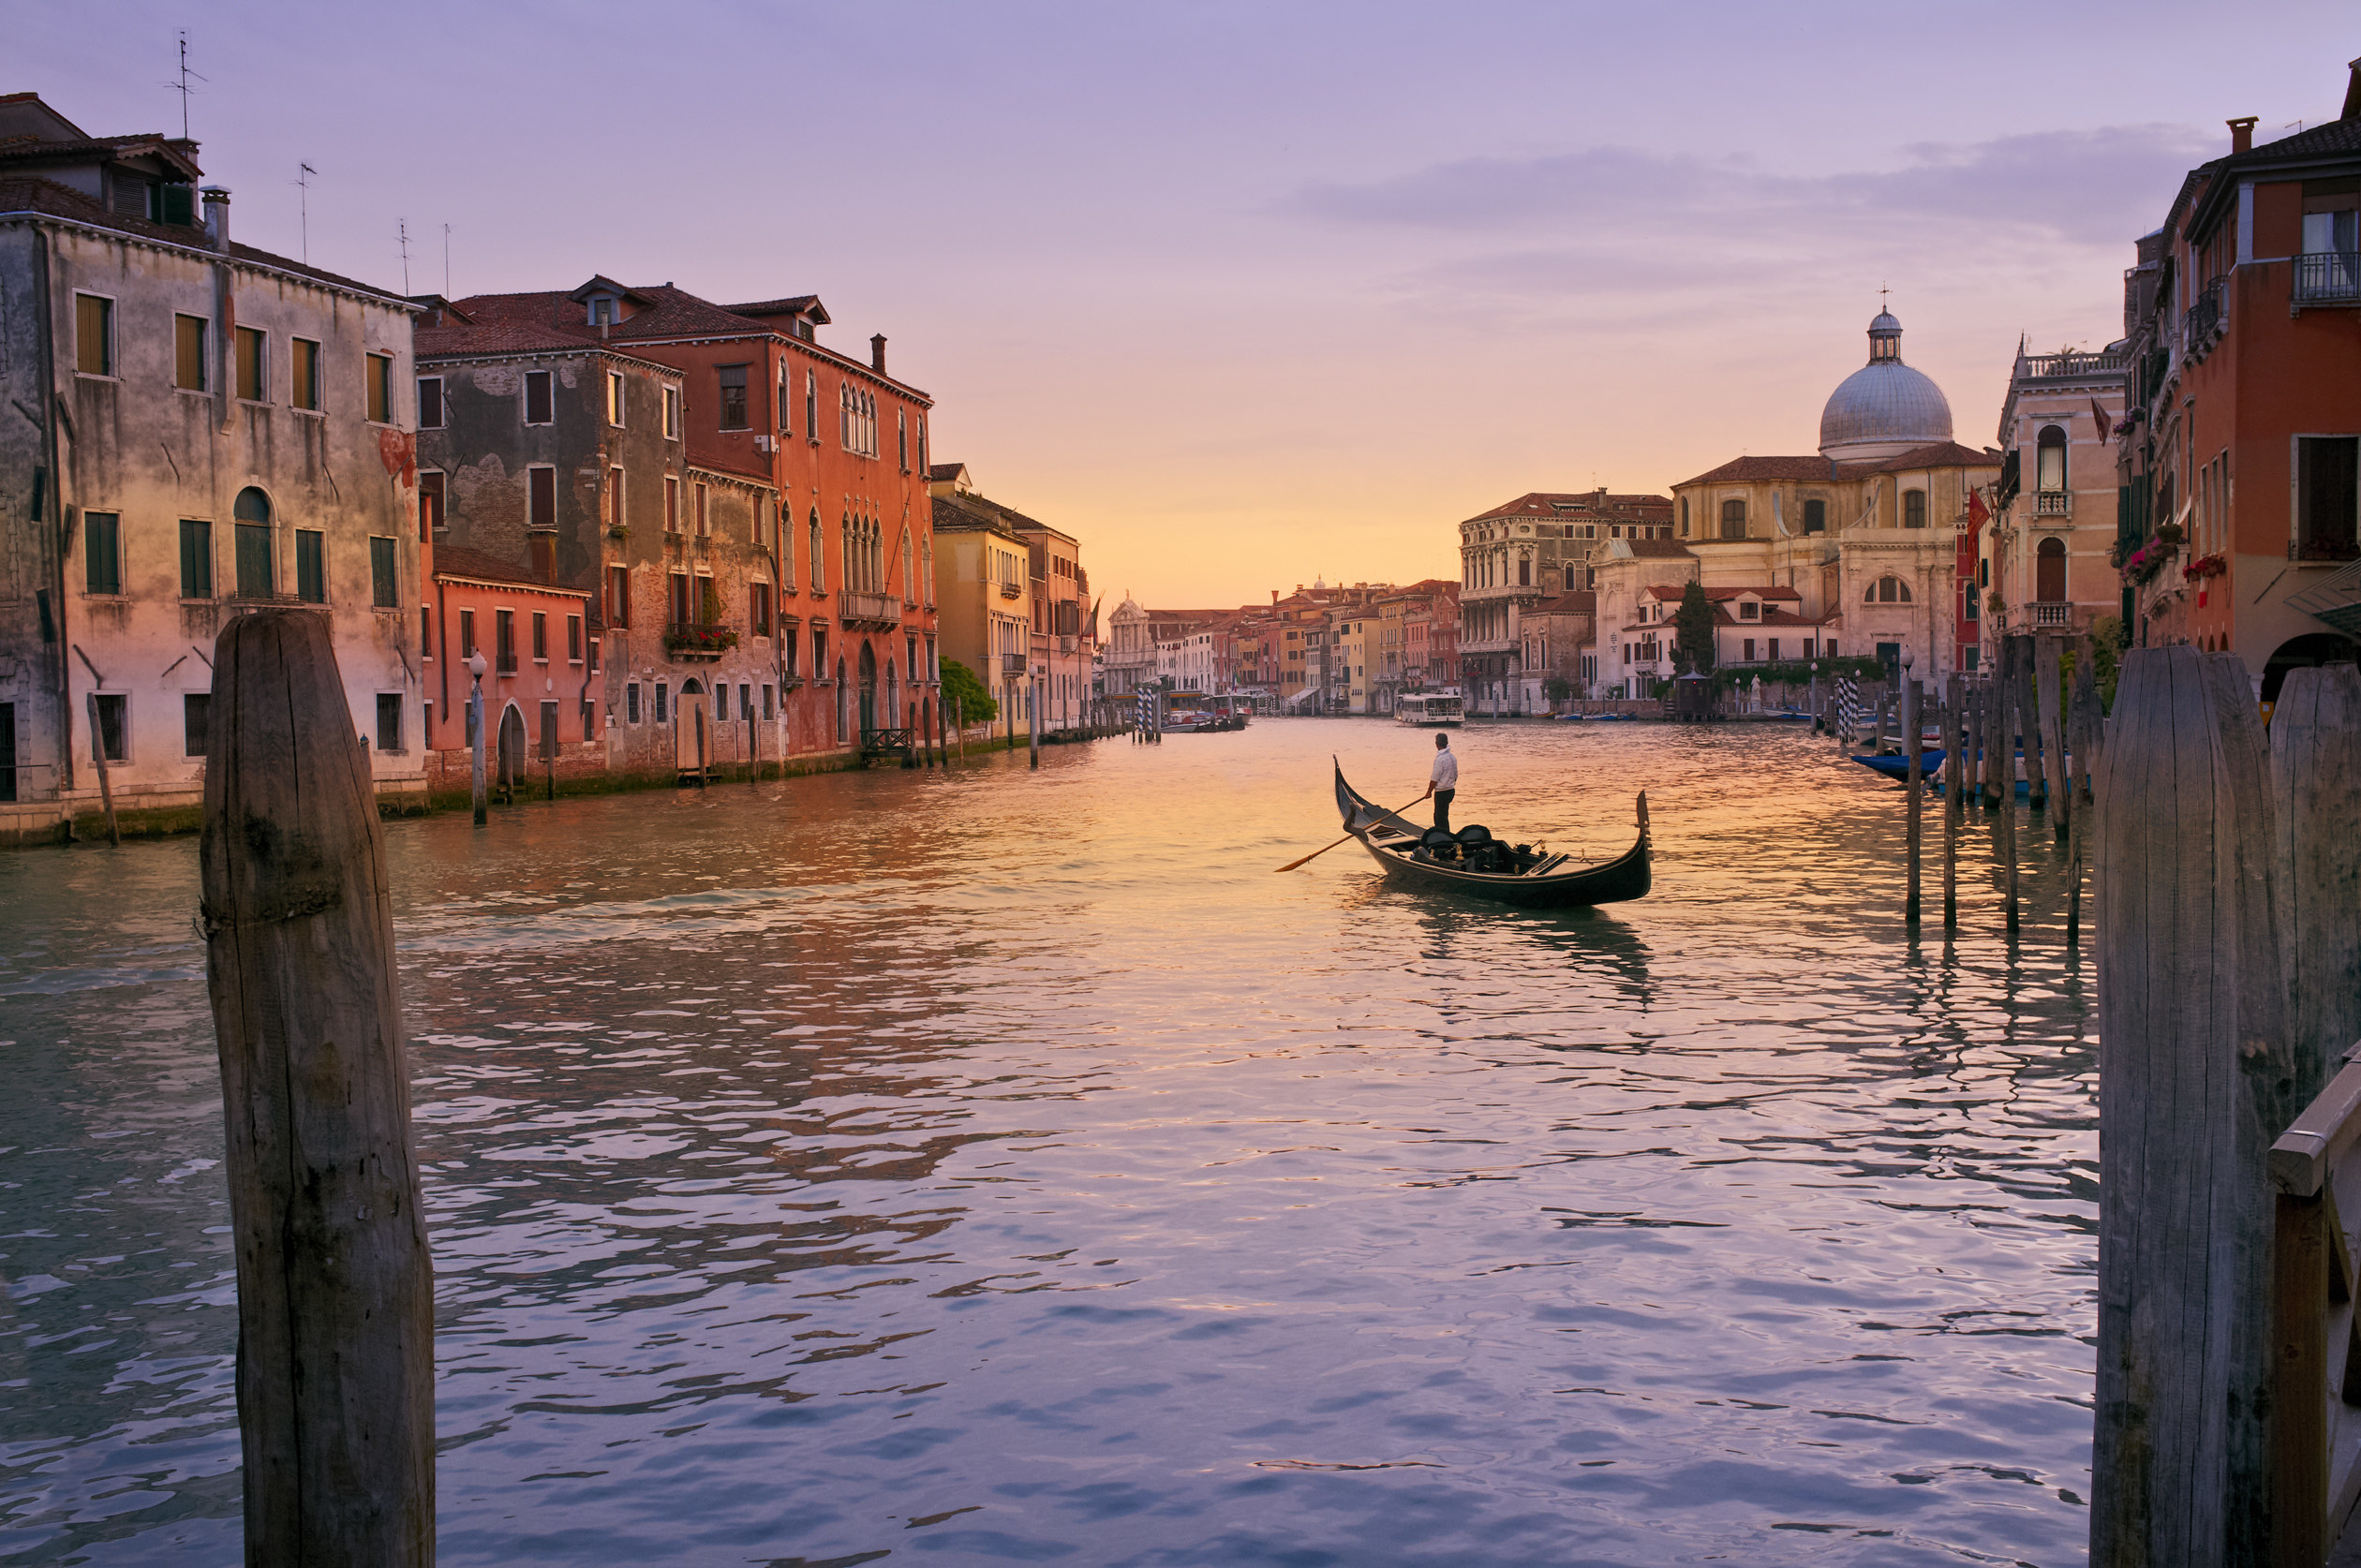 A man rowing a gondola on a canal in Venice.